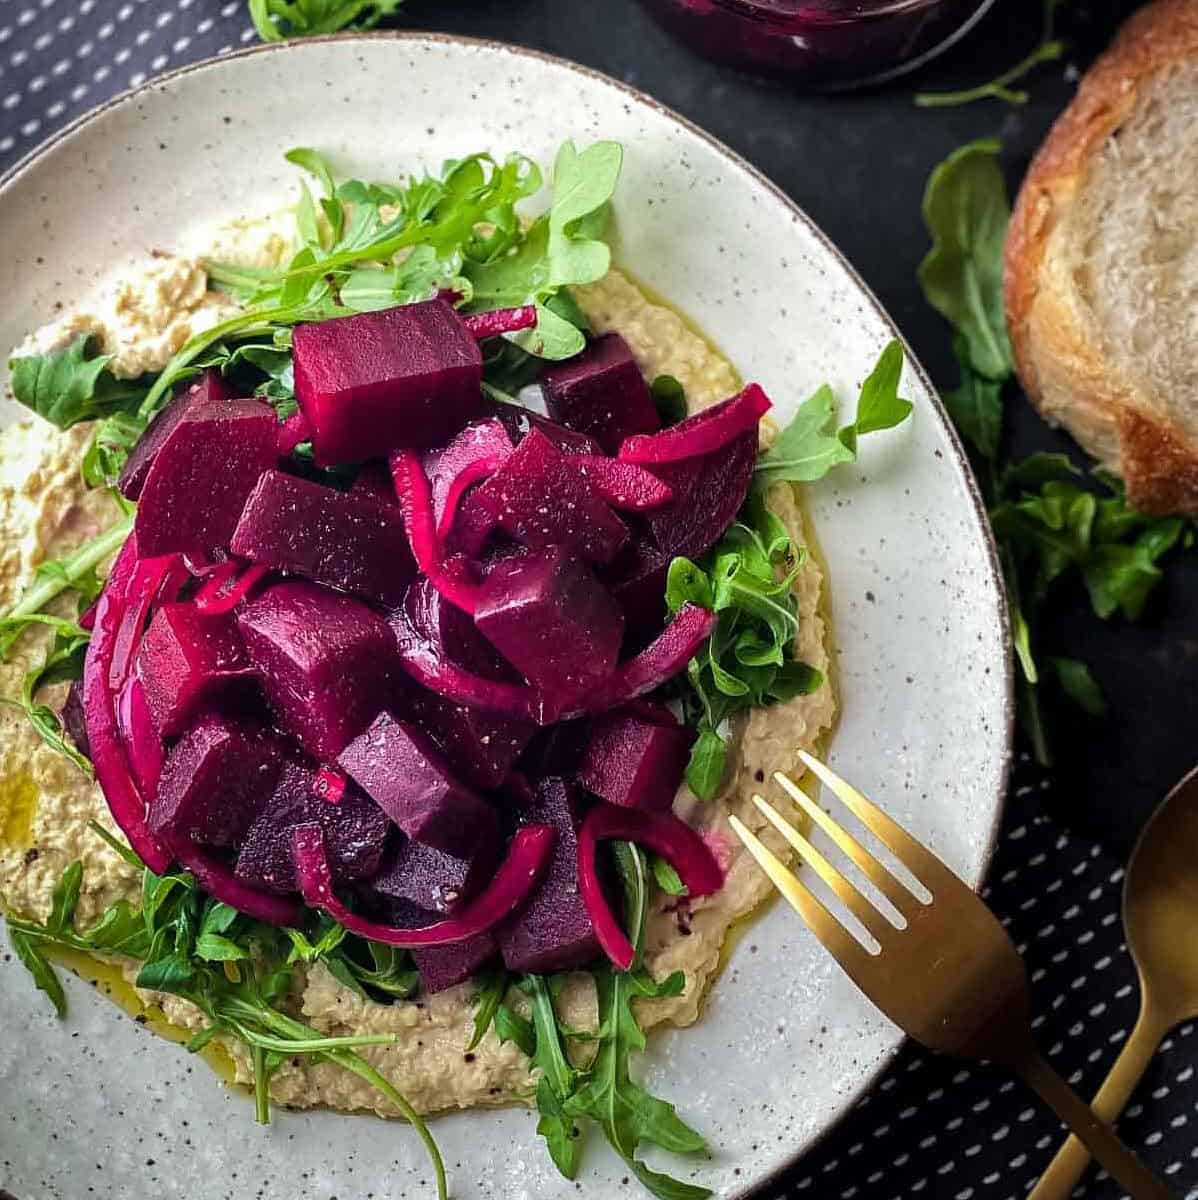  Beet-ing the competition with this delicious vegan salad